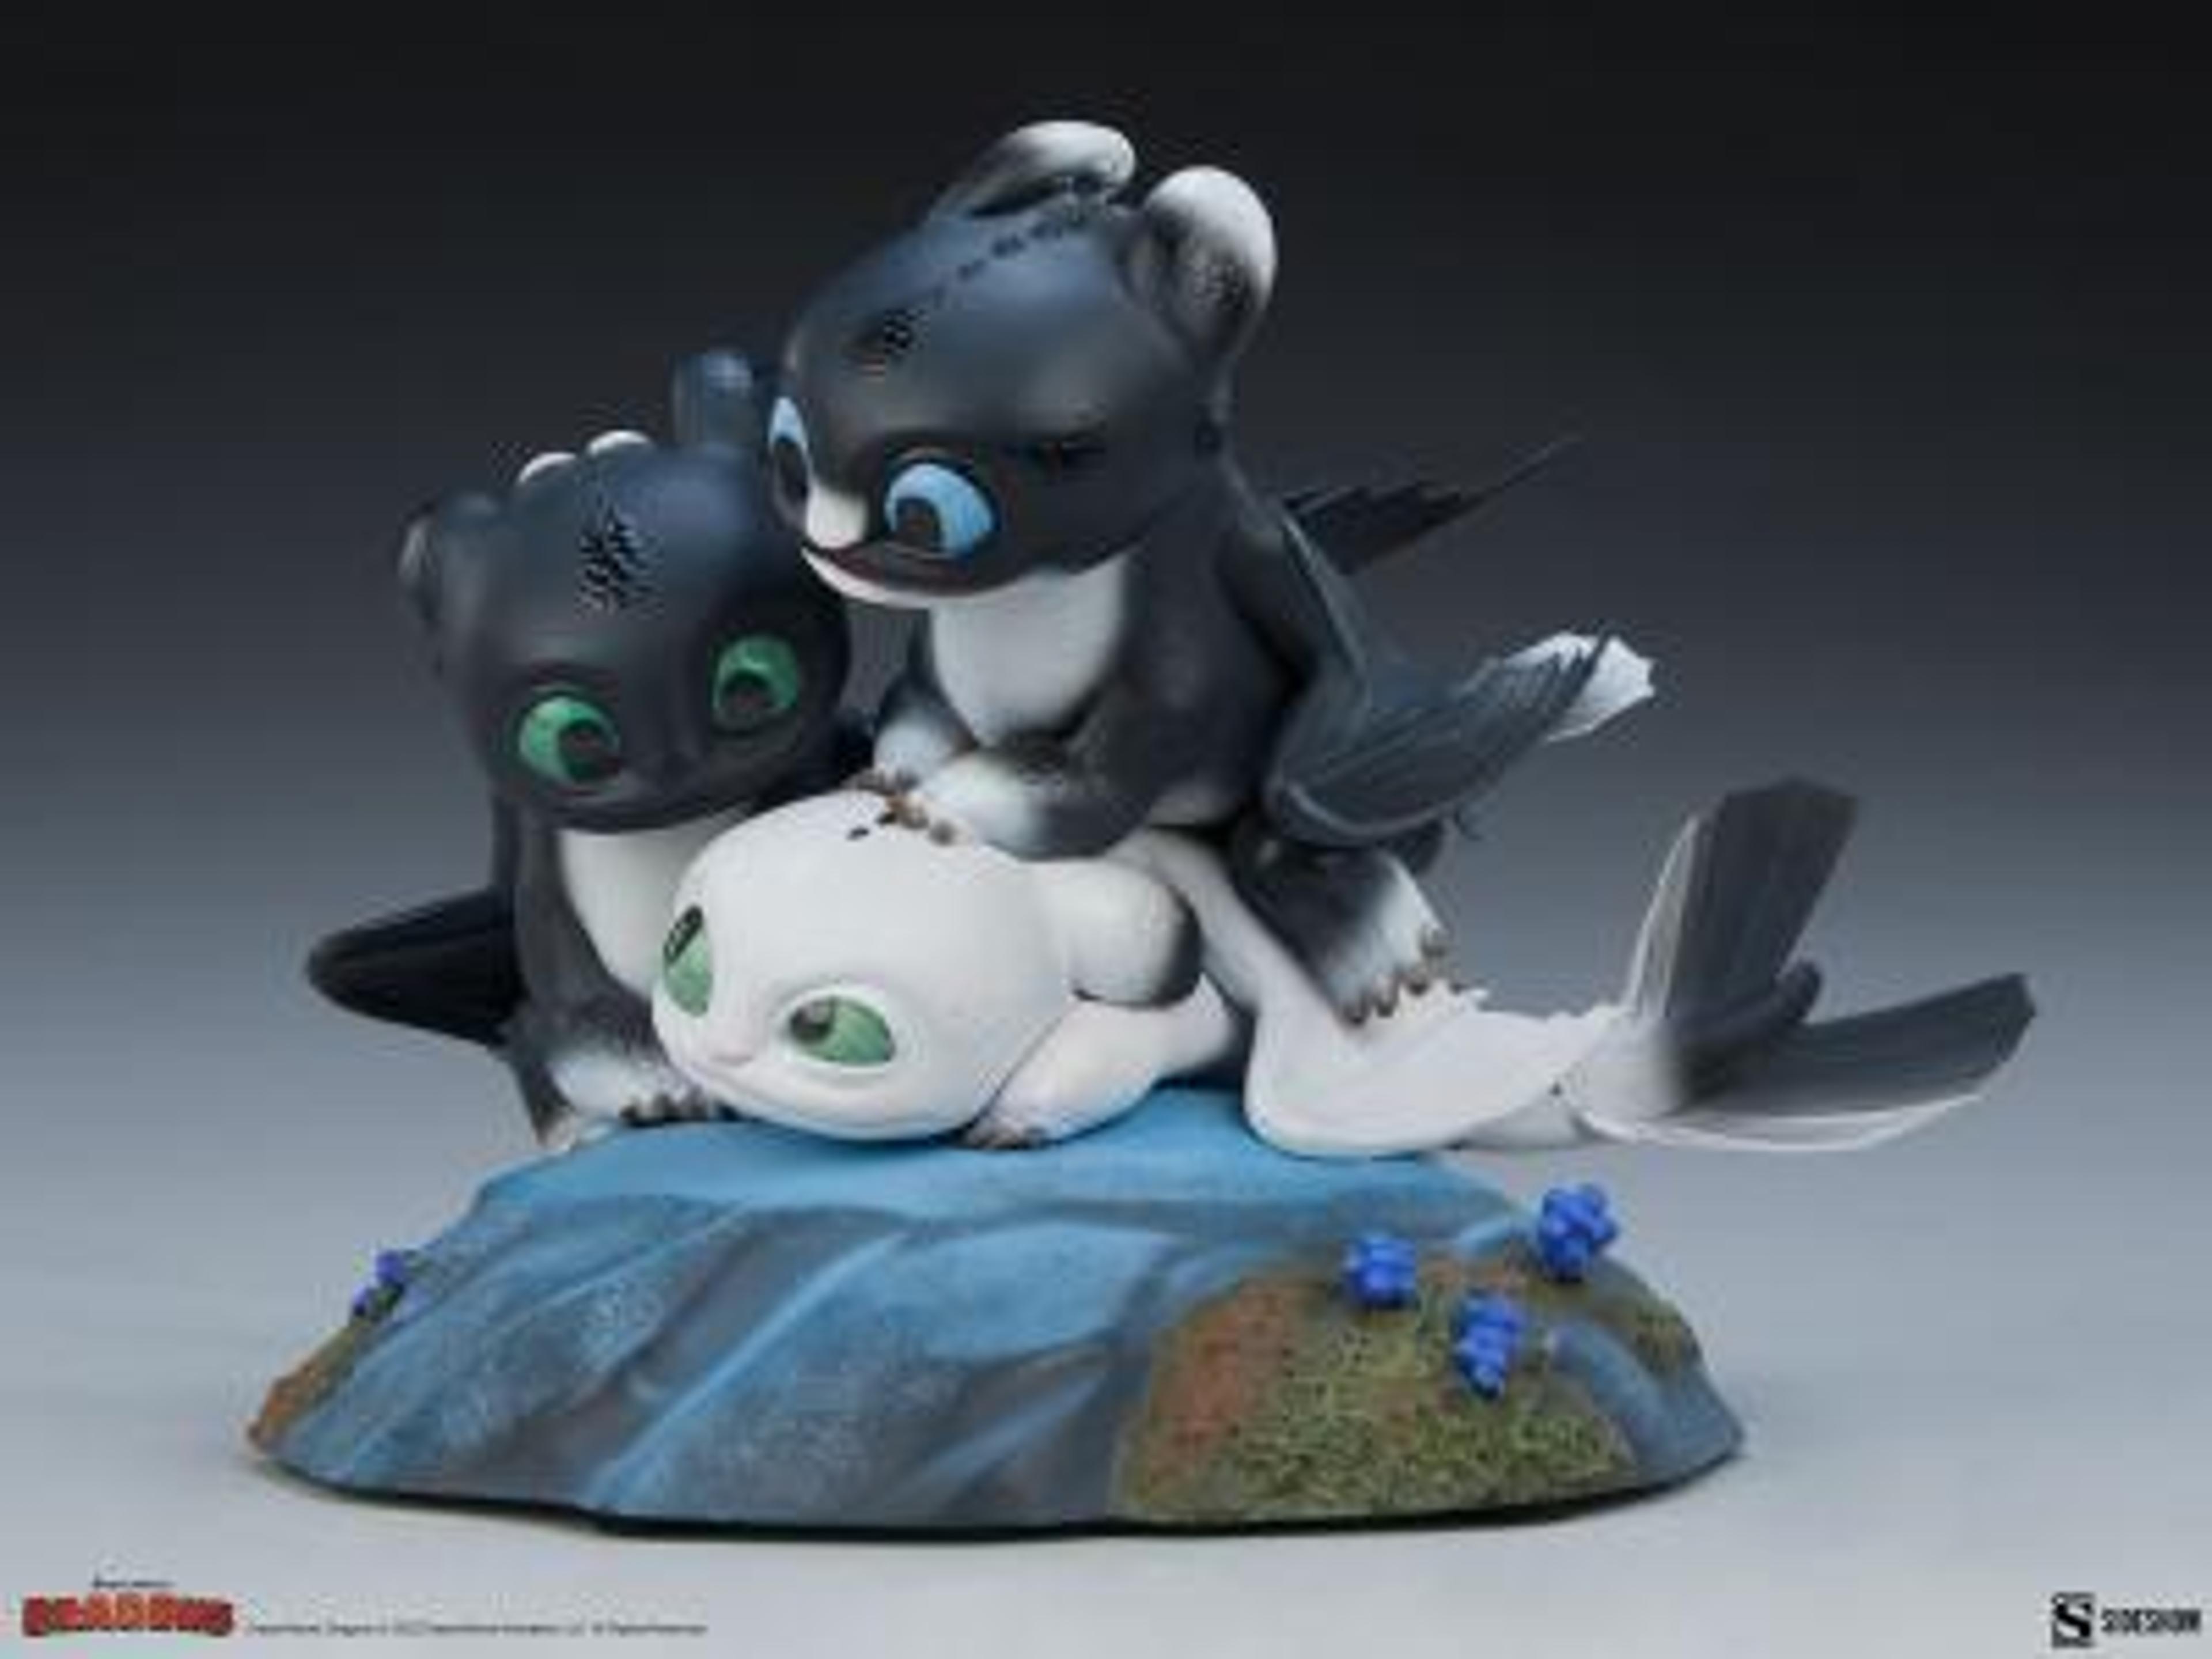 DART, POUNCER, AND RUFFRUNNER Statues by Sideshow Collectibles